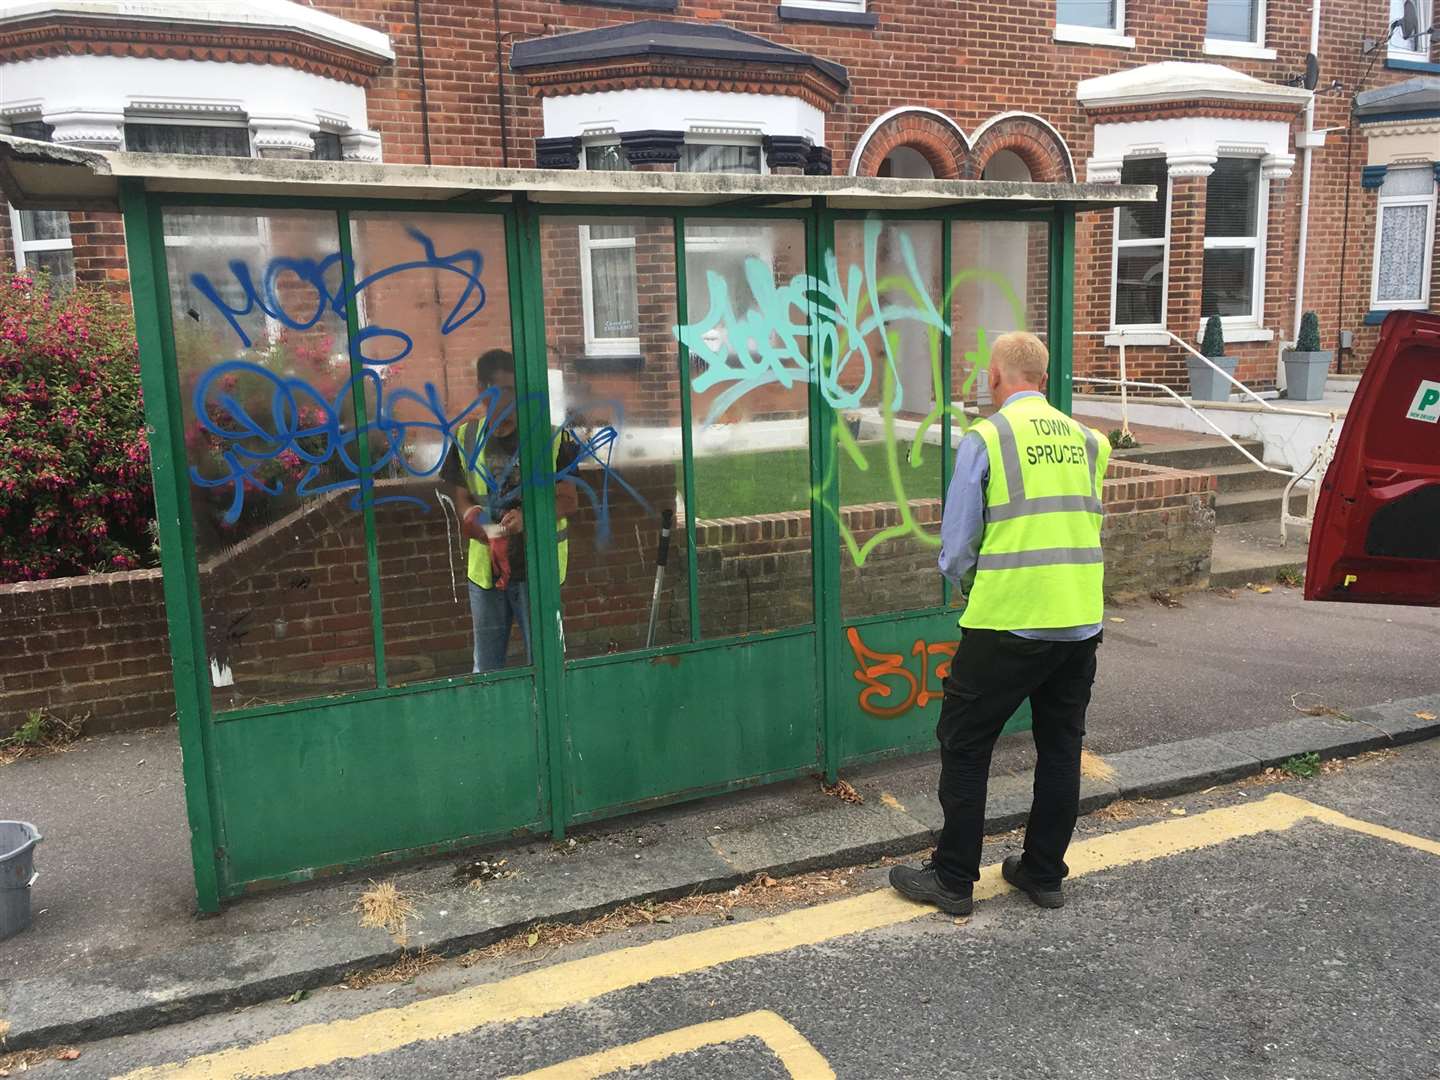 Work begins on the vandalised bus shelter. Picture provided by Peter Wallace